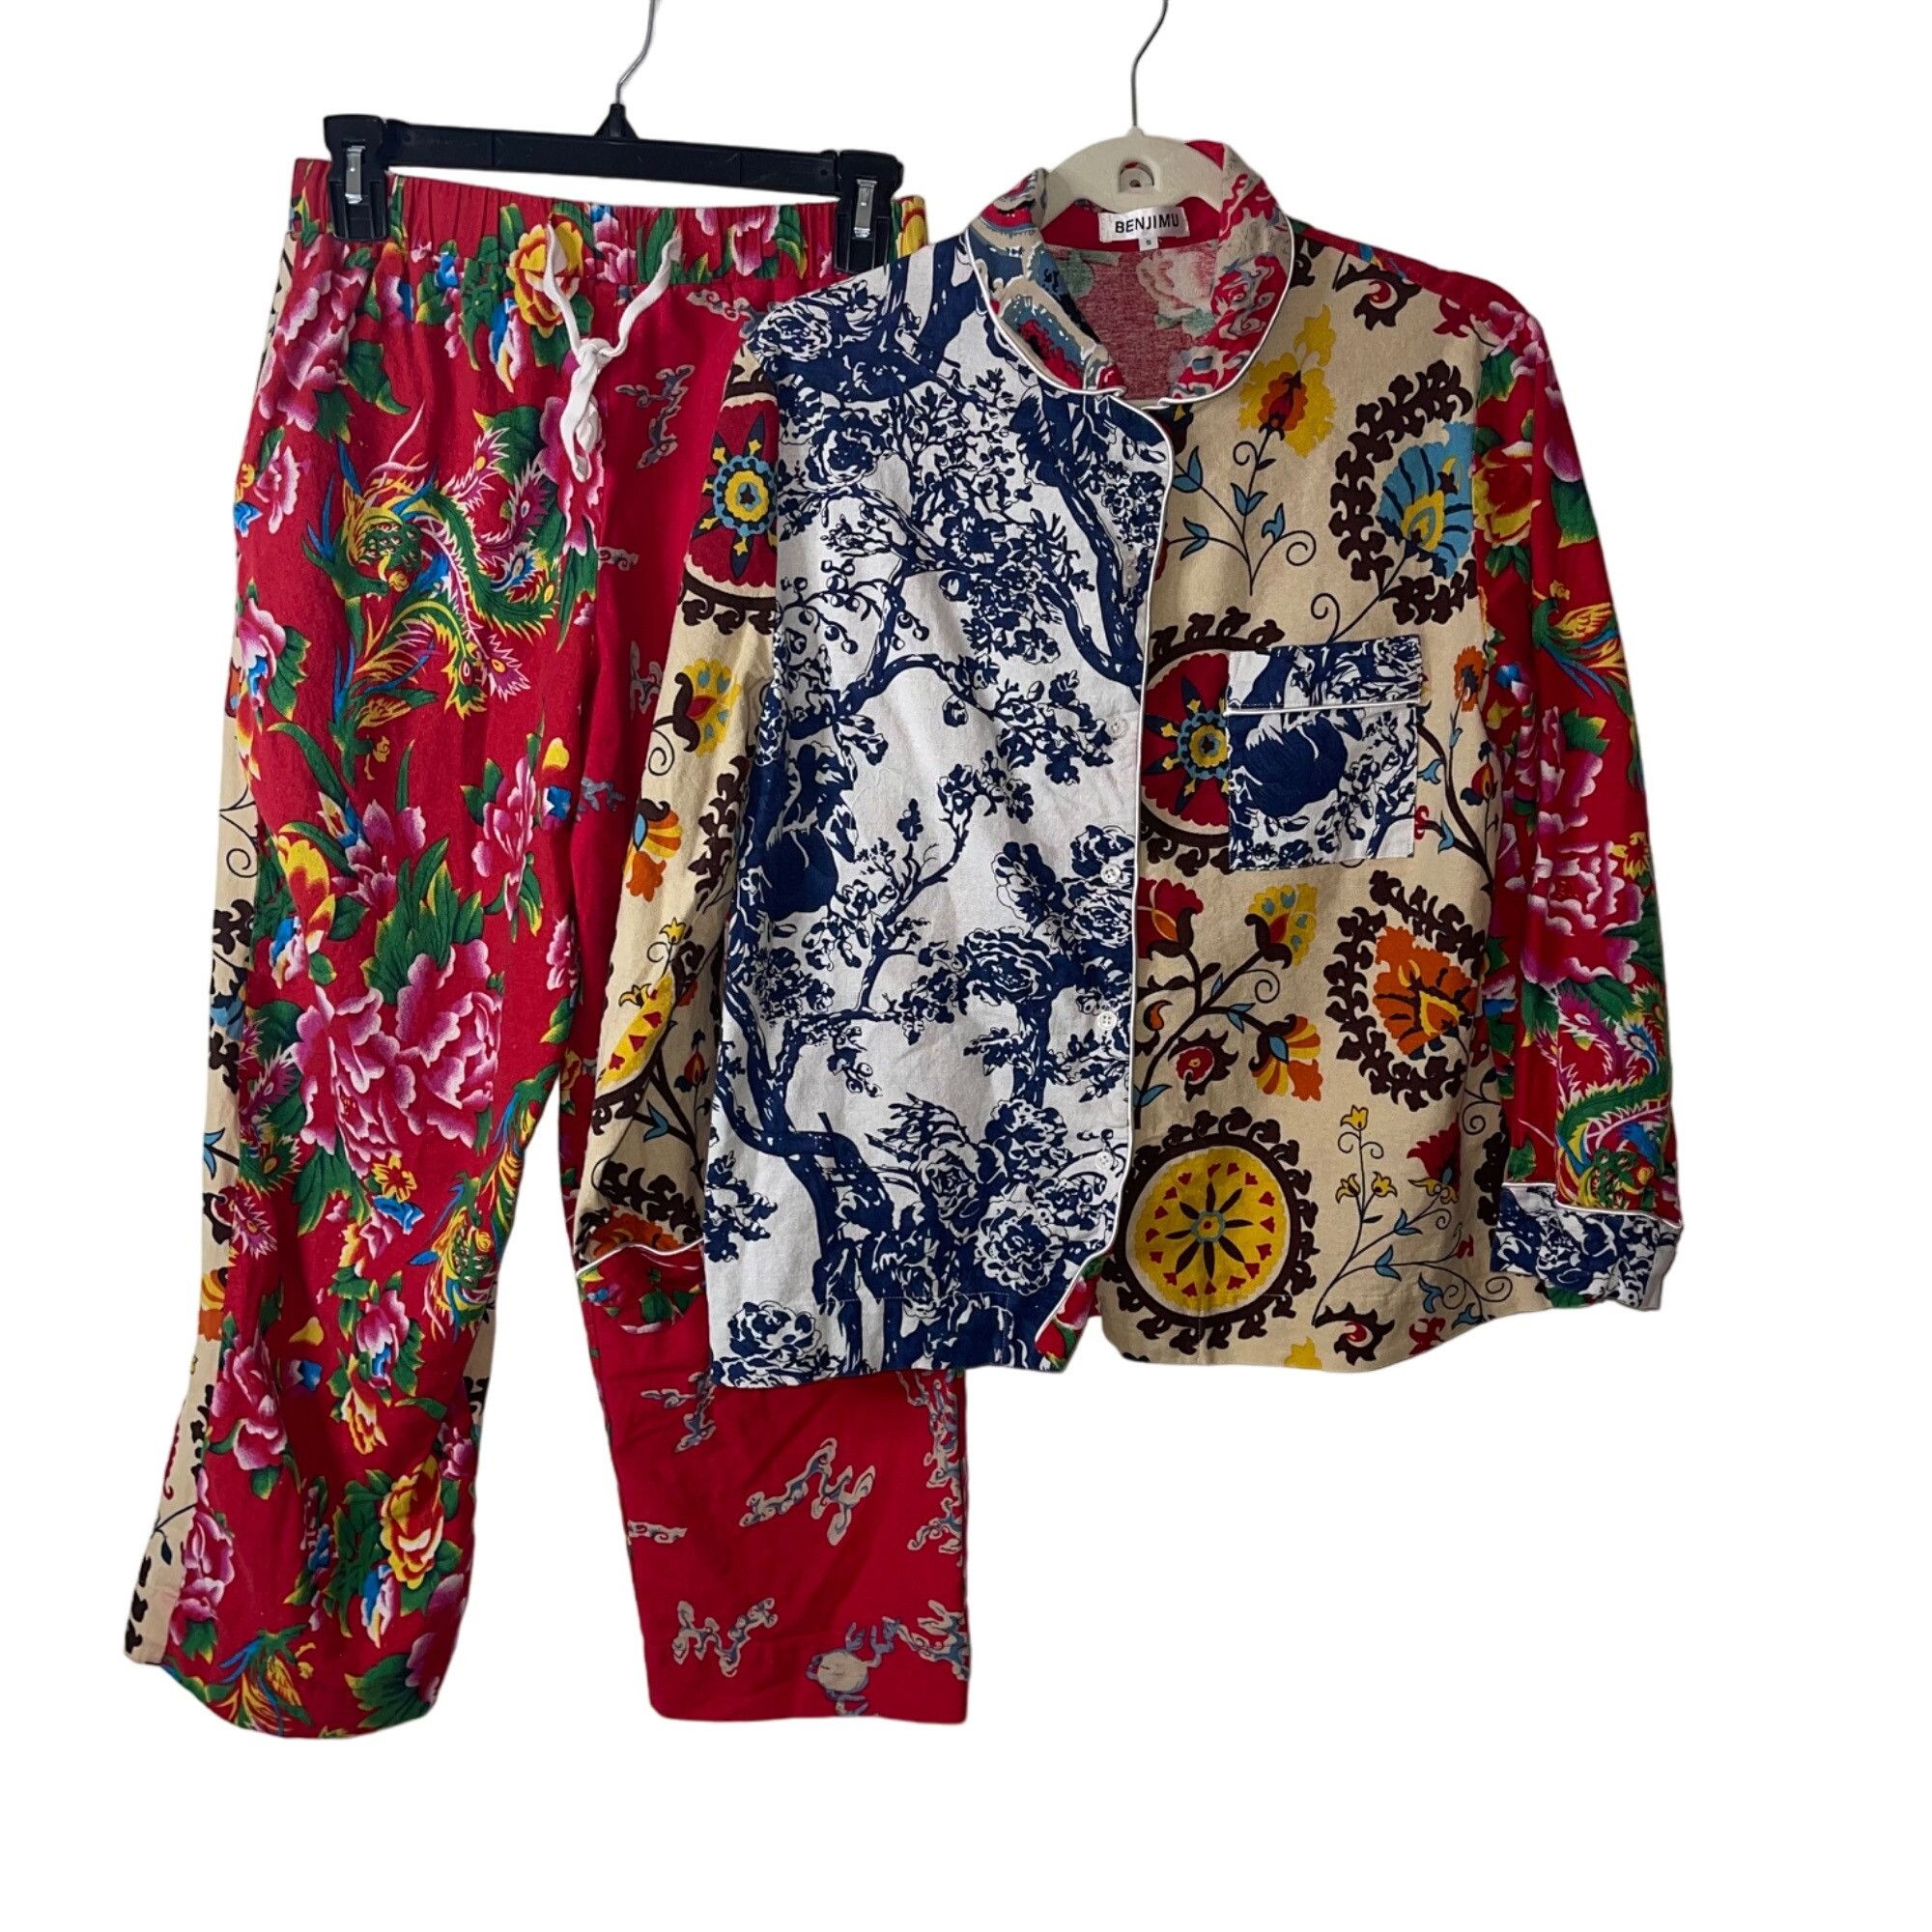 Other Benjimu Womens Pajama Set Size Small Multicolor Mixed Print Size ONE SIZE - 1 Preview